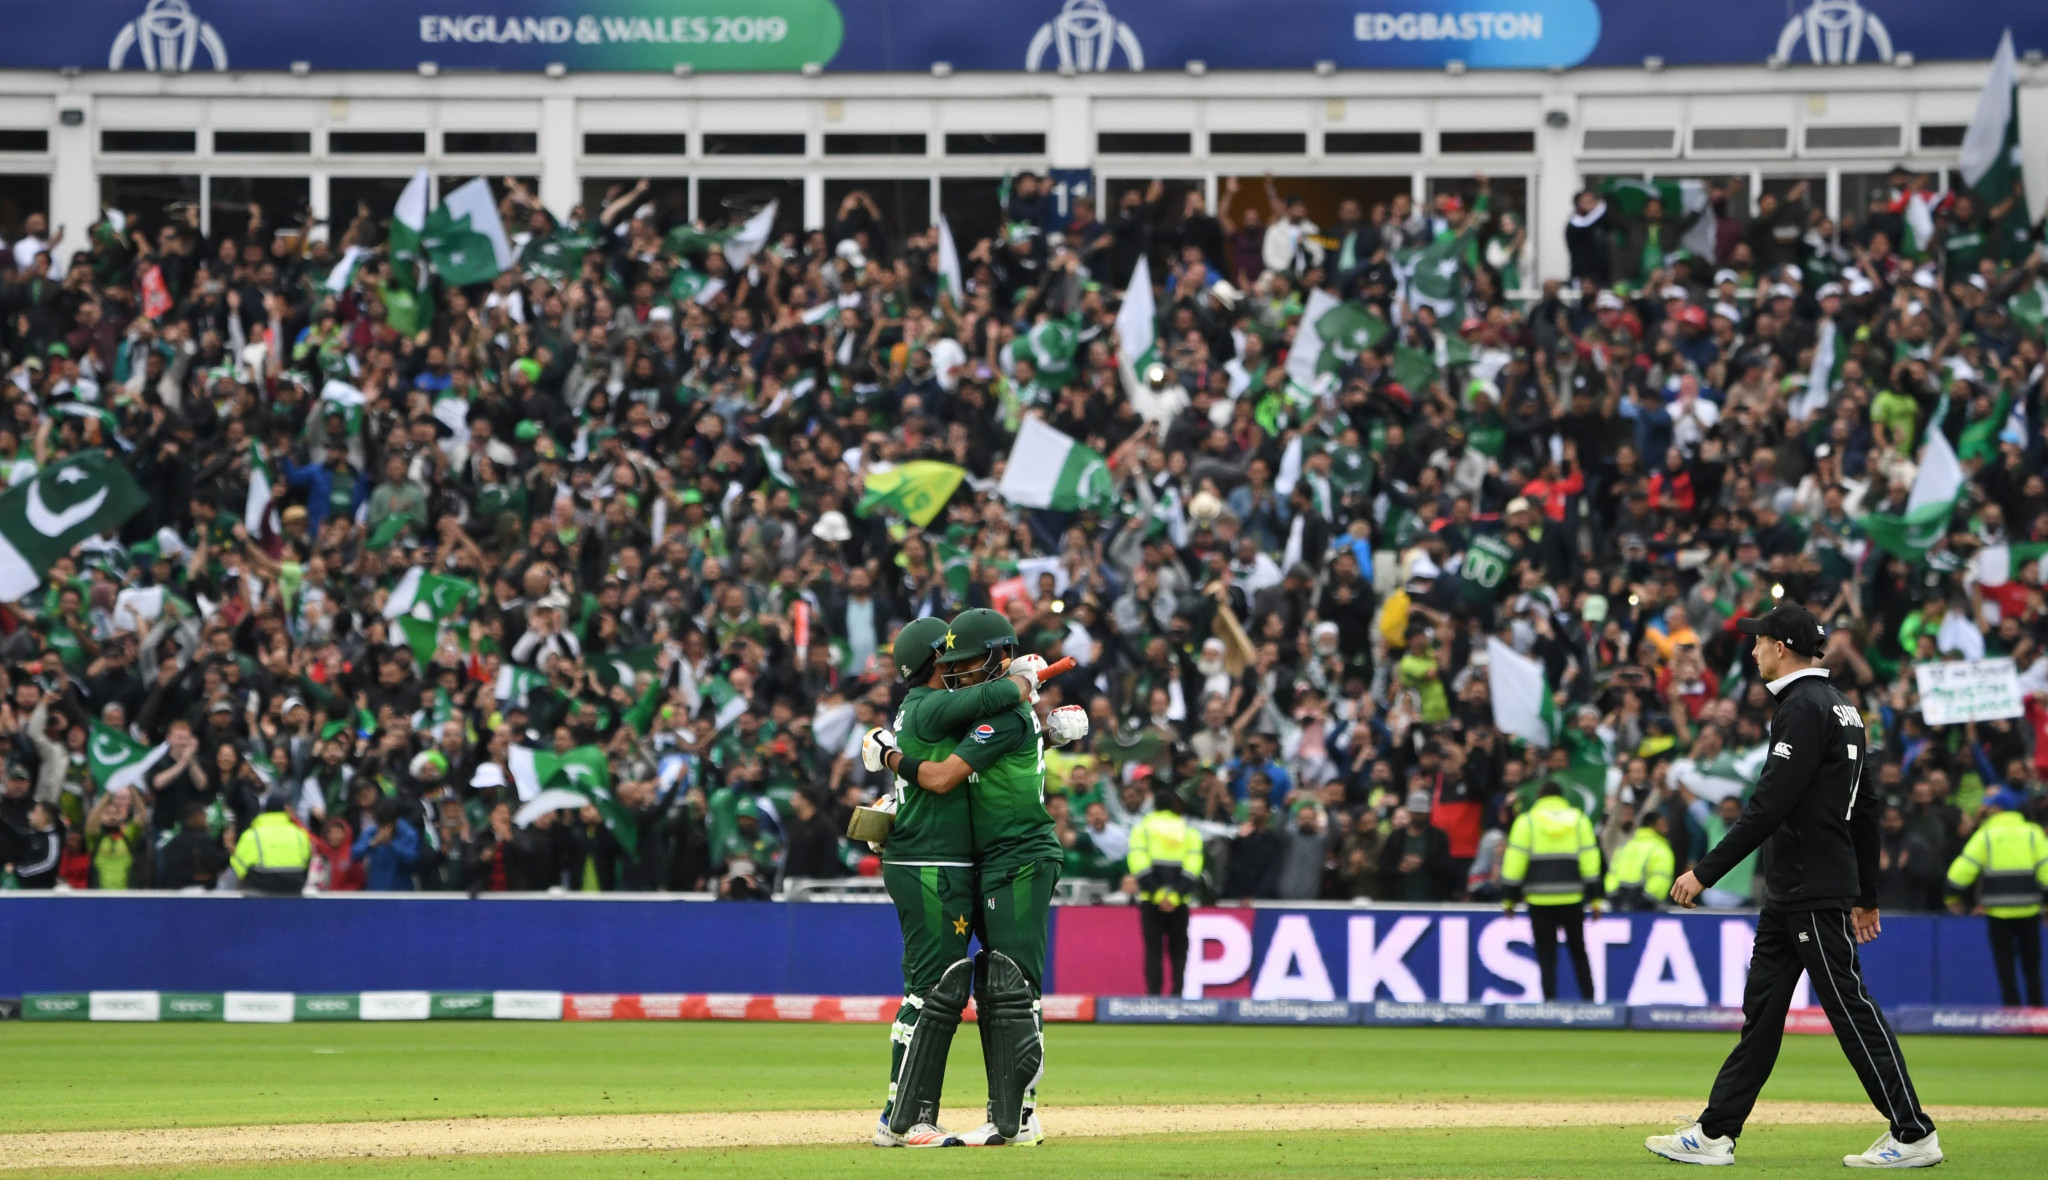 Pakistan beat New Zealand to keep semi-final hopes alive at Cricket World Cup